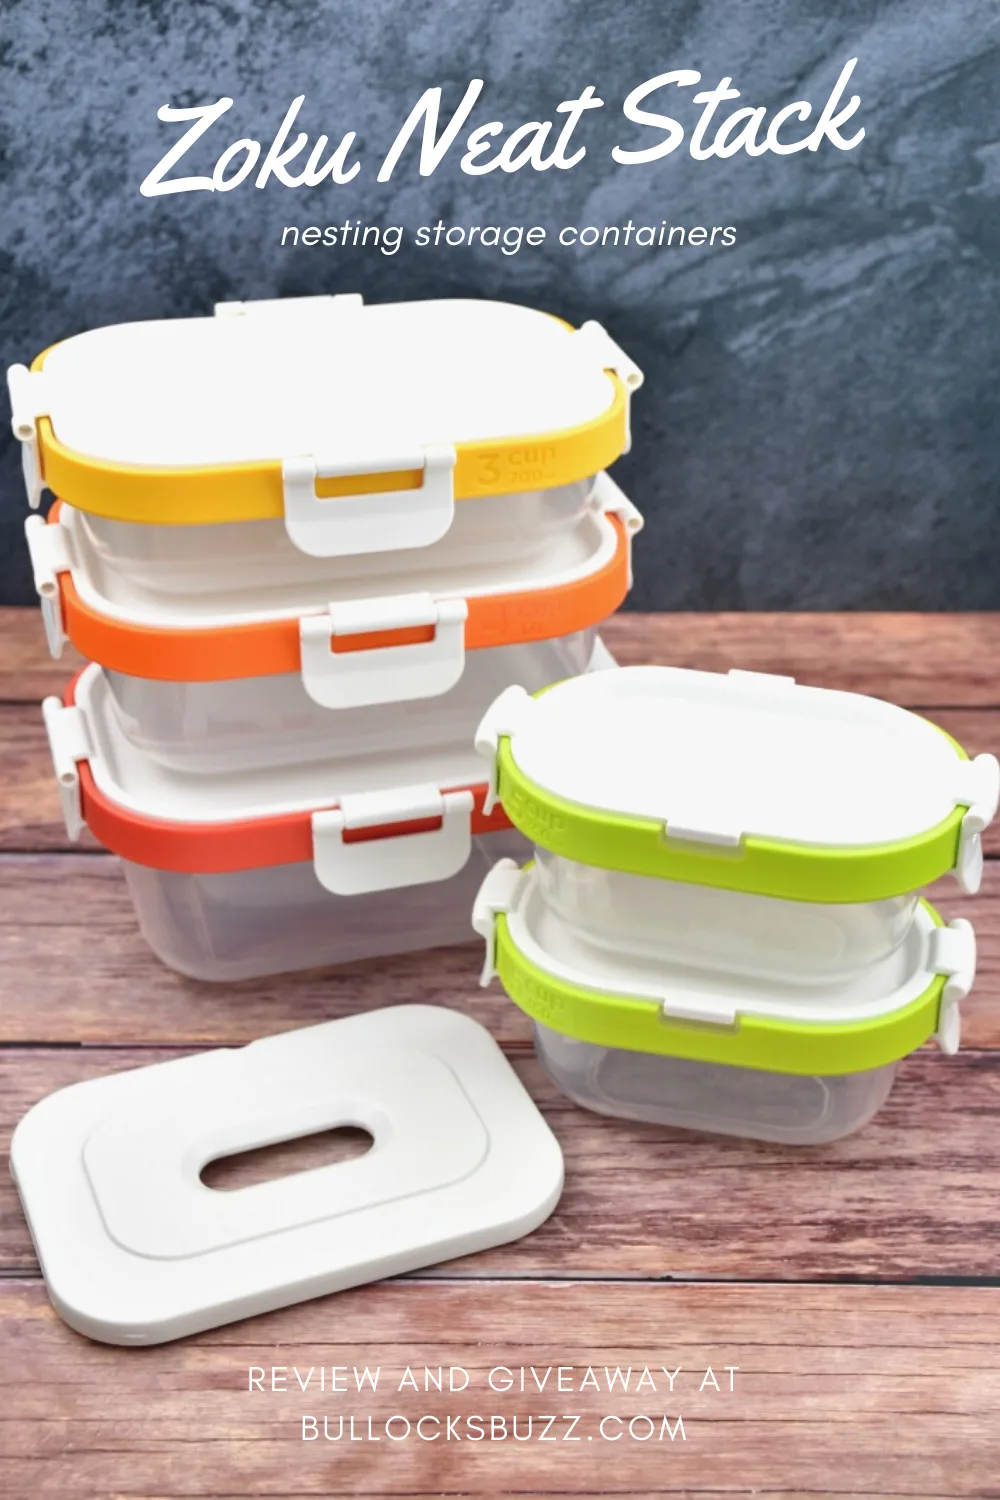 Zoku Neat Stack Nesting Storage Containers Review - Bullock's Buzz